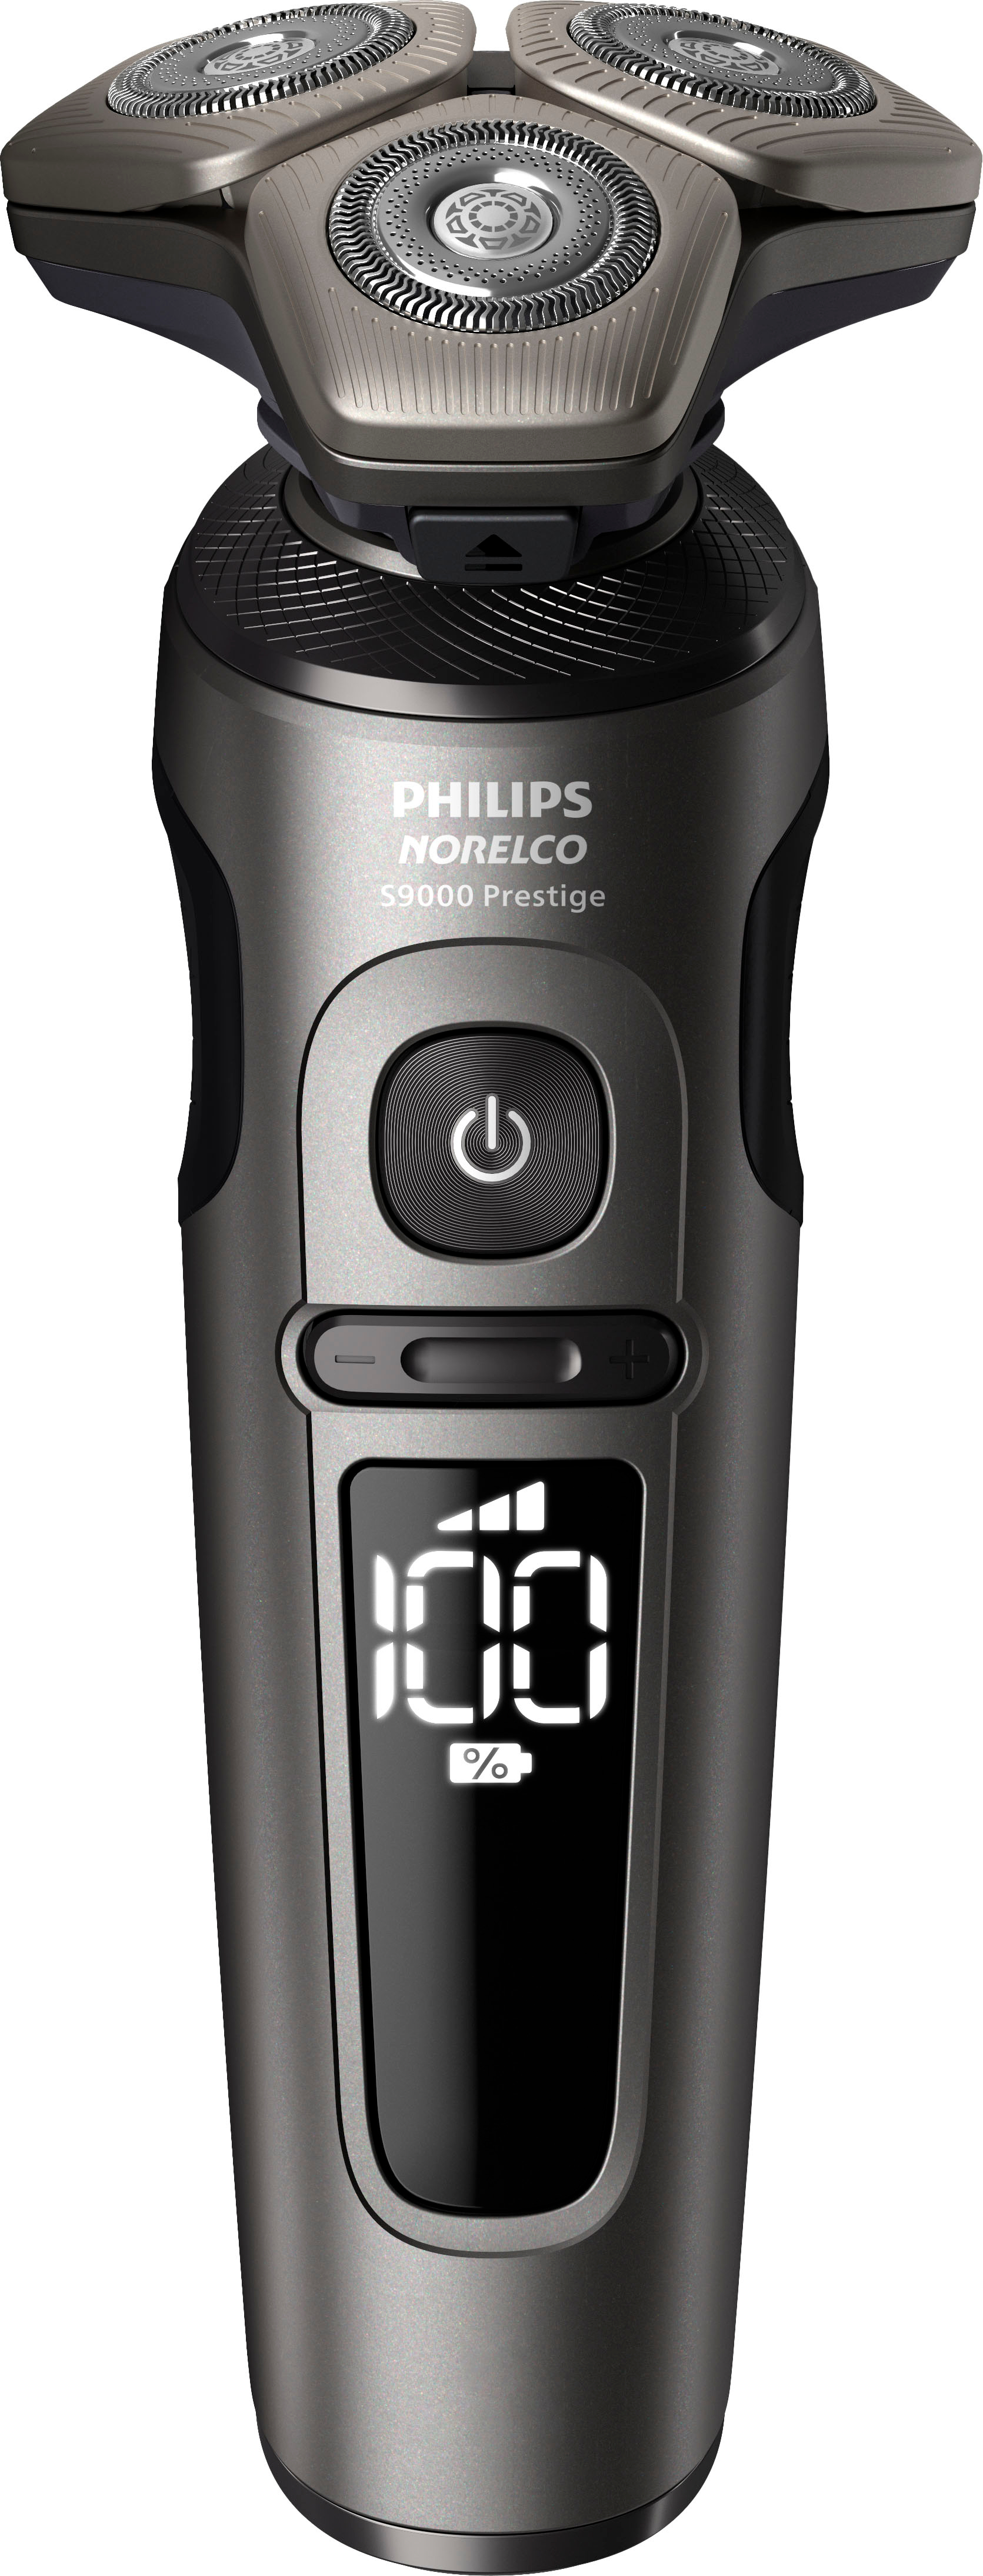 Philips Norelco 9000 Prestige Shaver SP9872/86 Buy with SP9872/86 Charging Qi - Best Pad Black